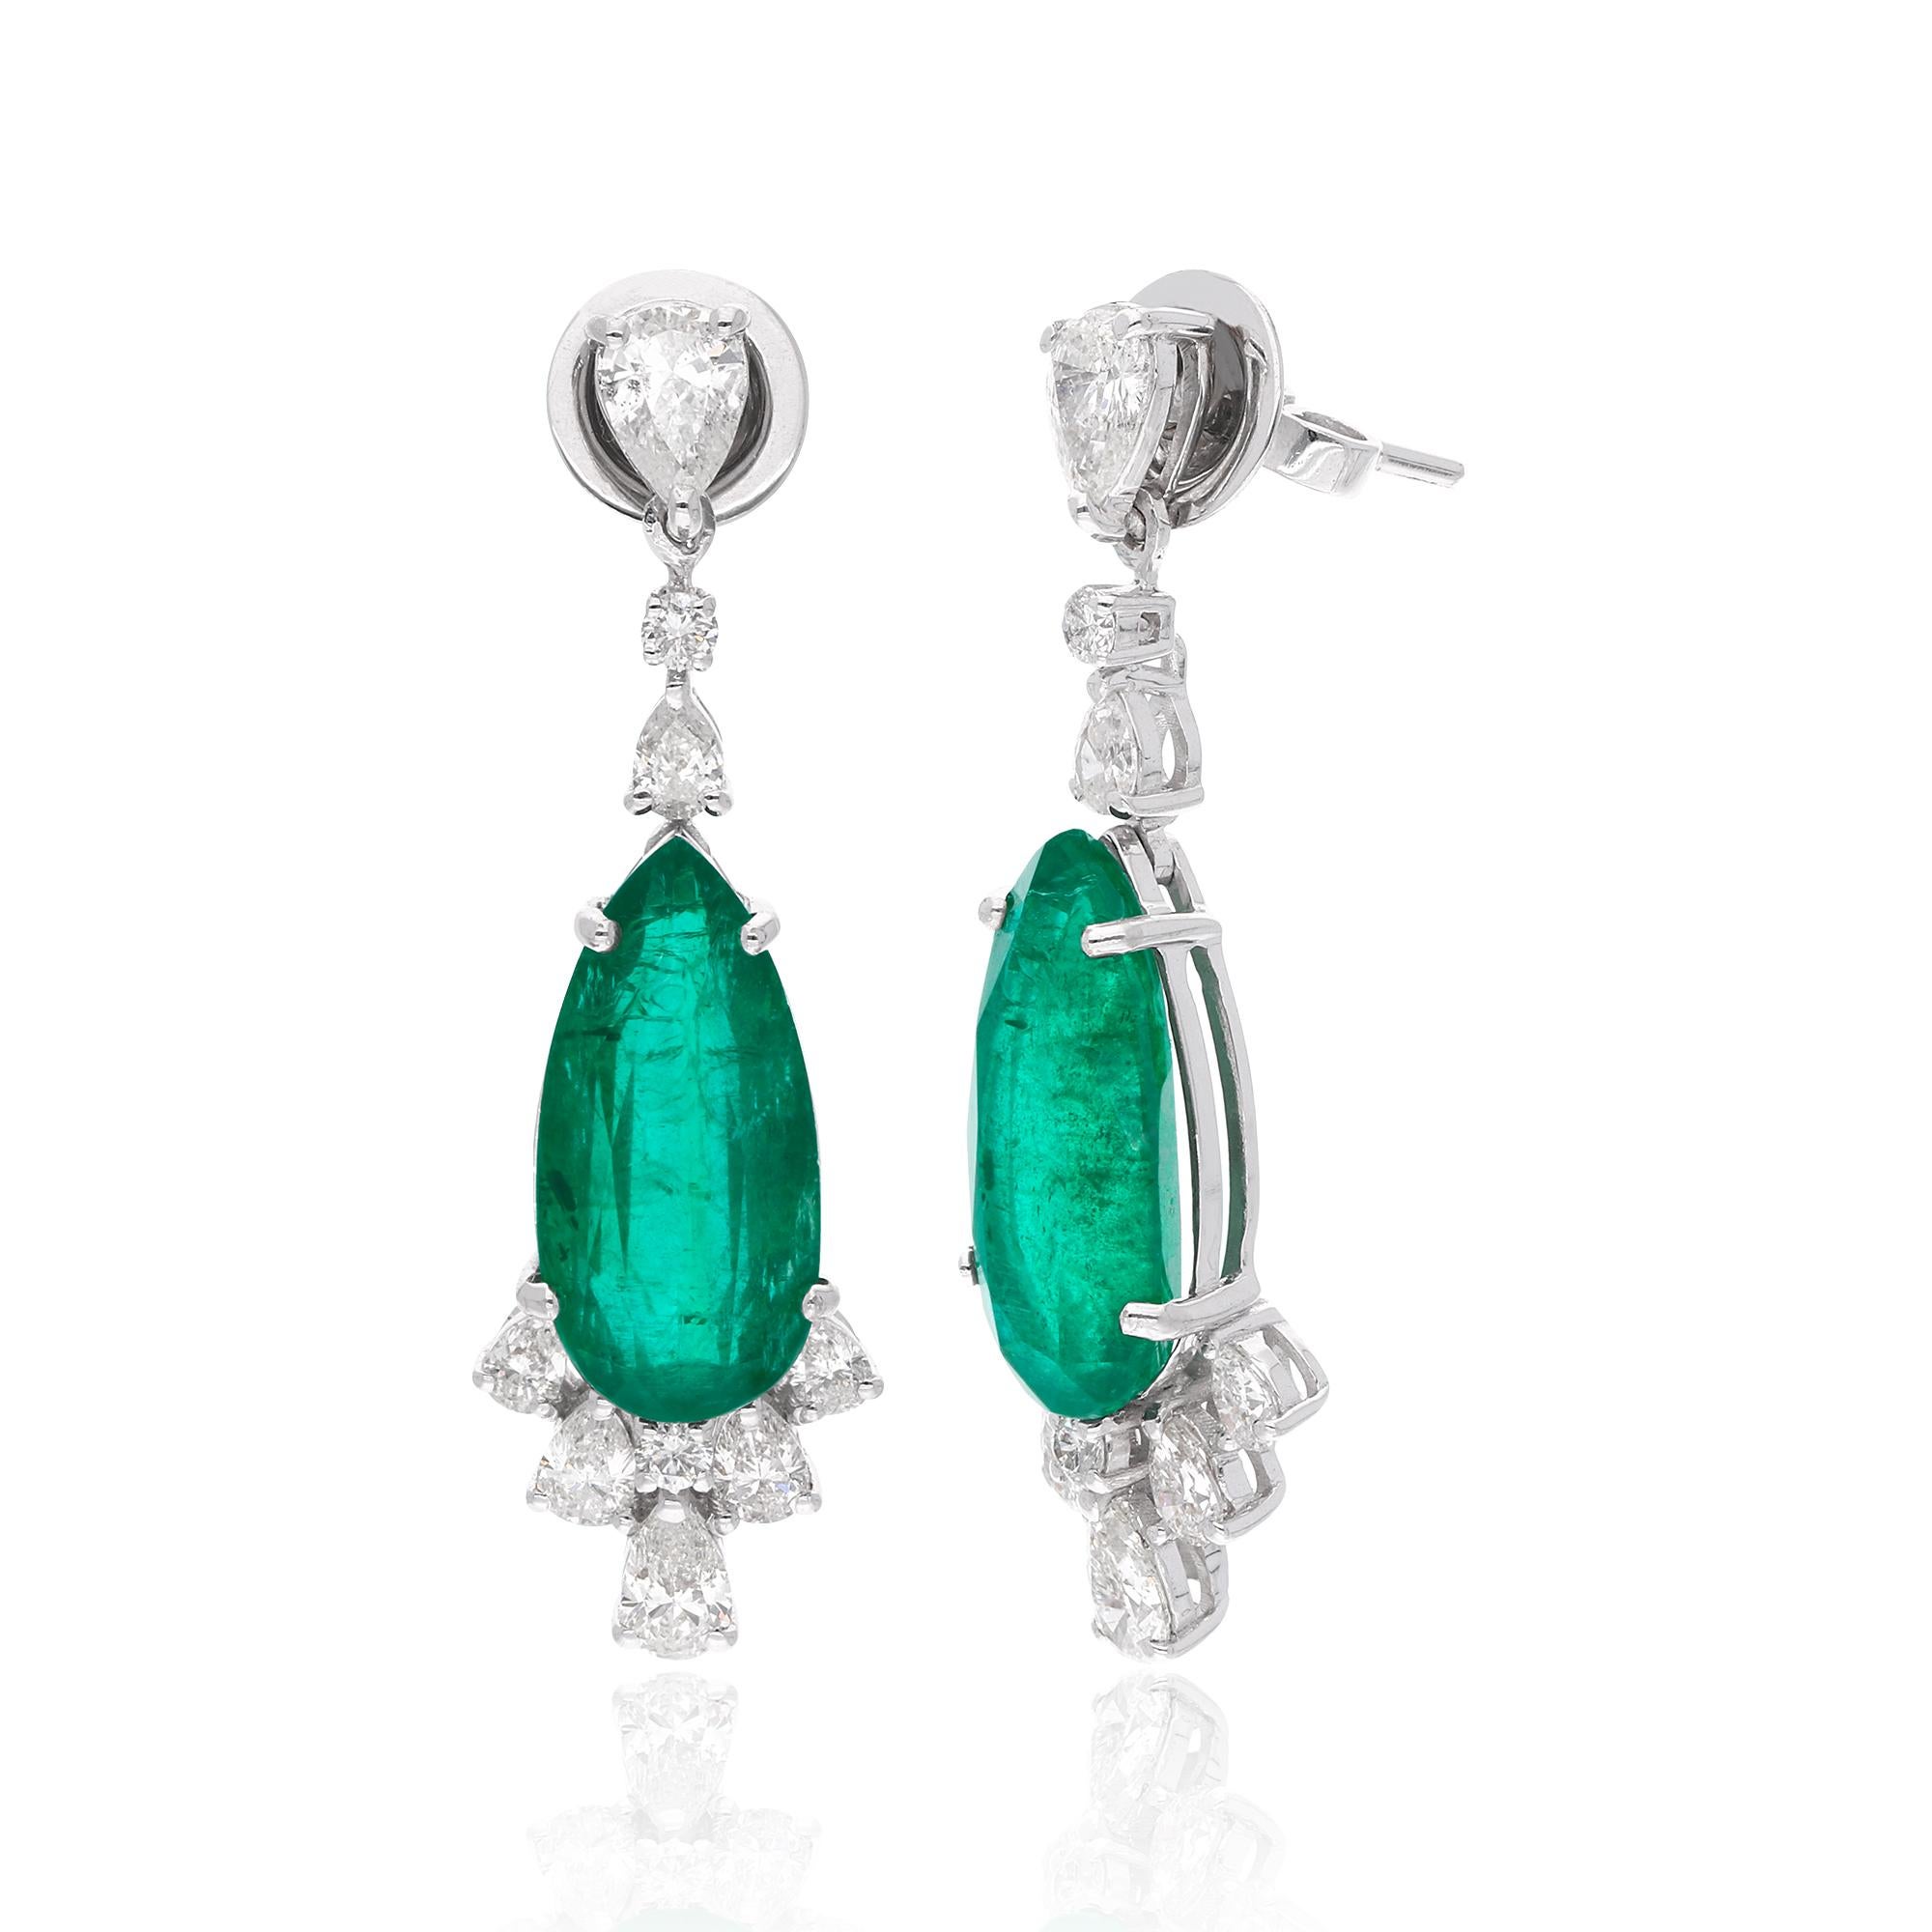 Item Code :- SEE-12592
Gross Wt. :- 7.39 gm
18k White Gold Wt. :- 5.26 gm
Diamond Wt. :- 2.00 Ct. ( AVERAGE DIAMOND CLARITY SI1-SI2 & COLOR H-I )
Emerald Wt. :- 8.63 Ct. 
Earrings Size :- 39 mm approx.
✦ Sizing
.....................
We can adjust